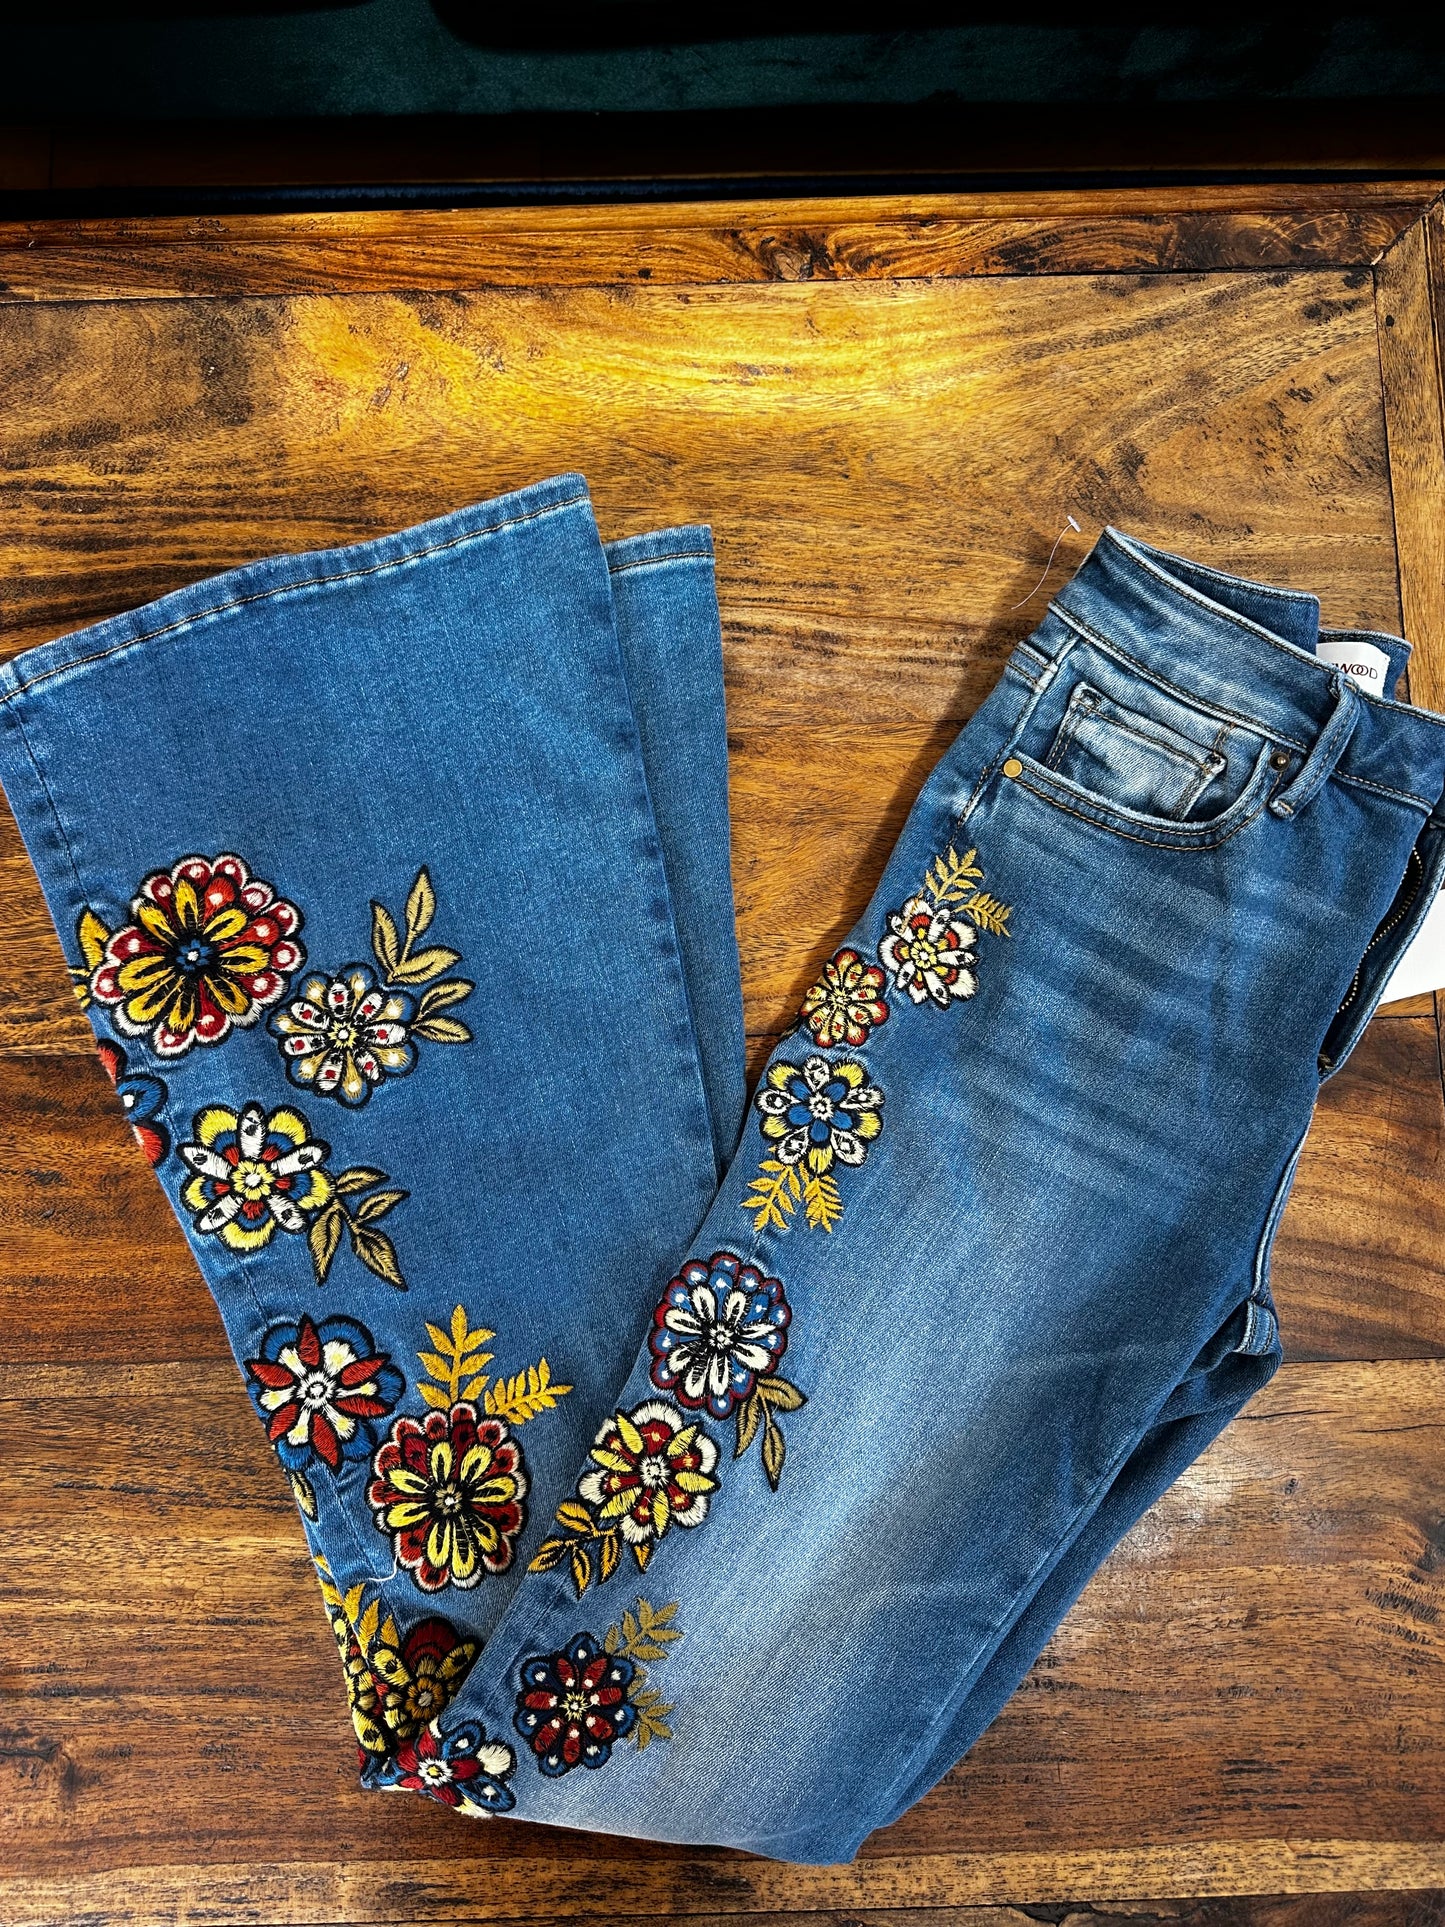 Driftwood Farrah Embroidered Jeans